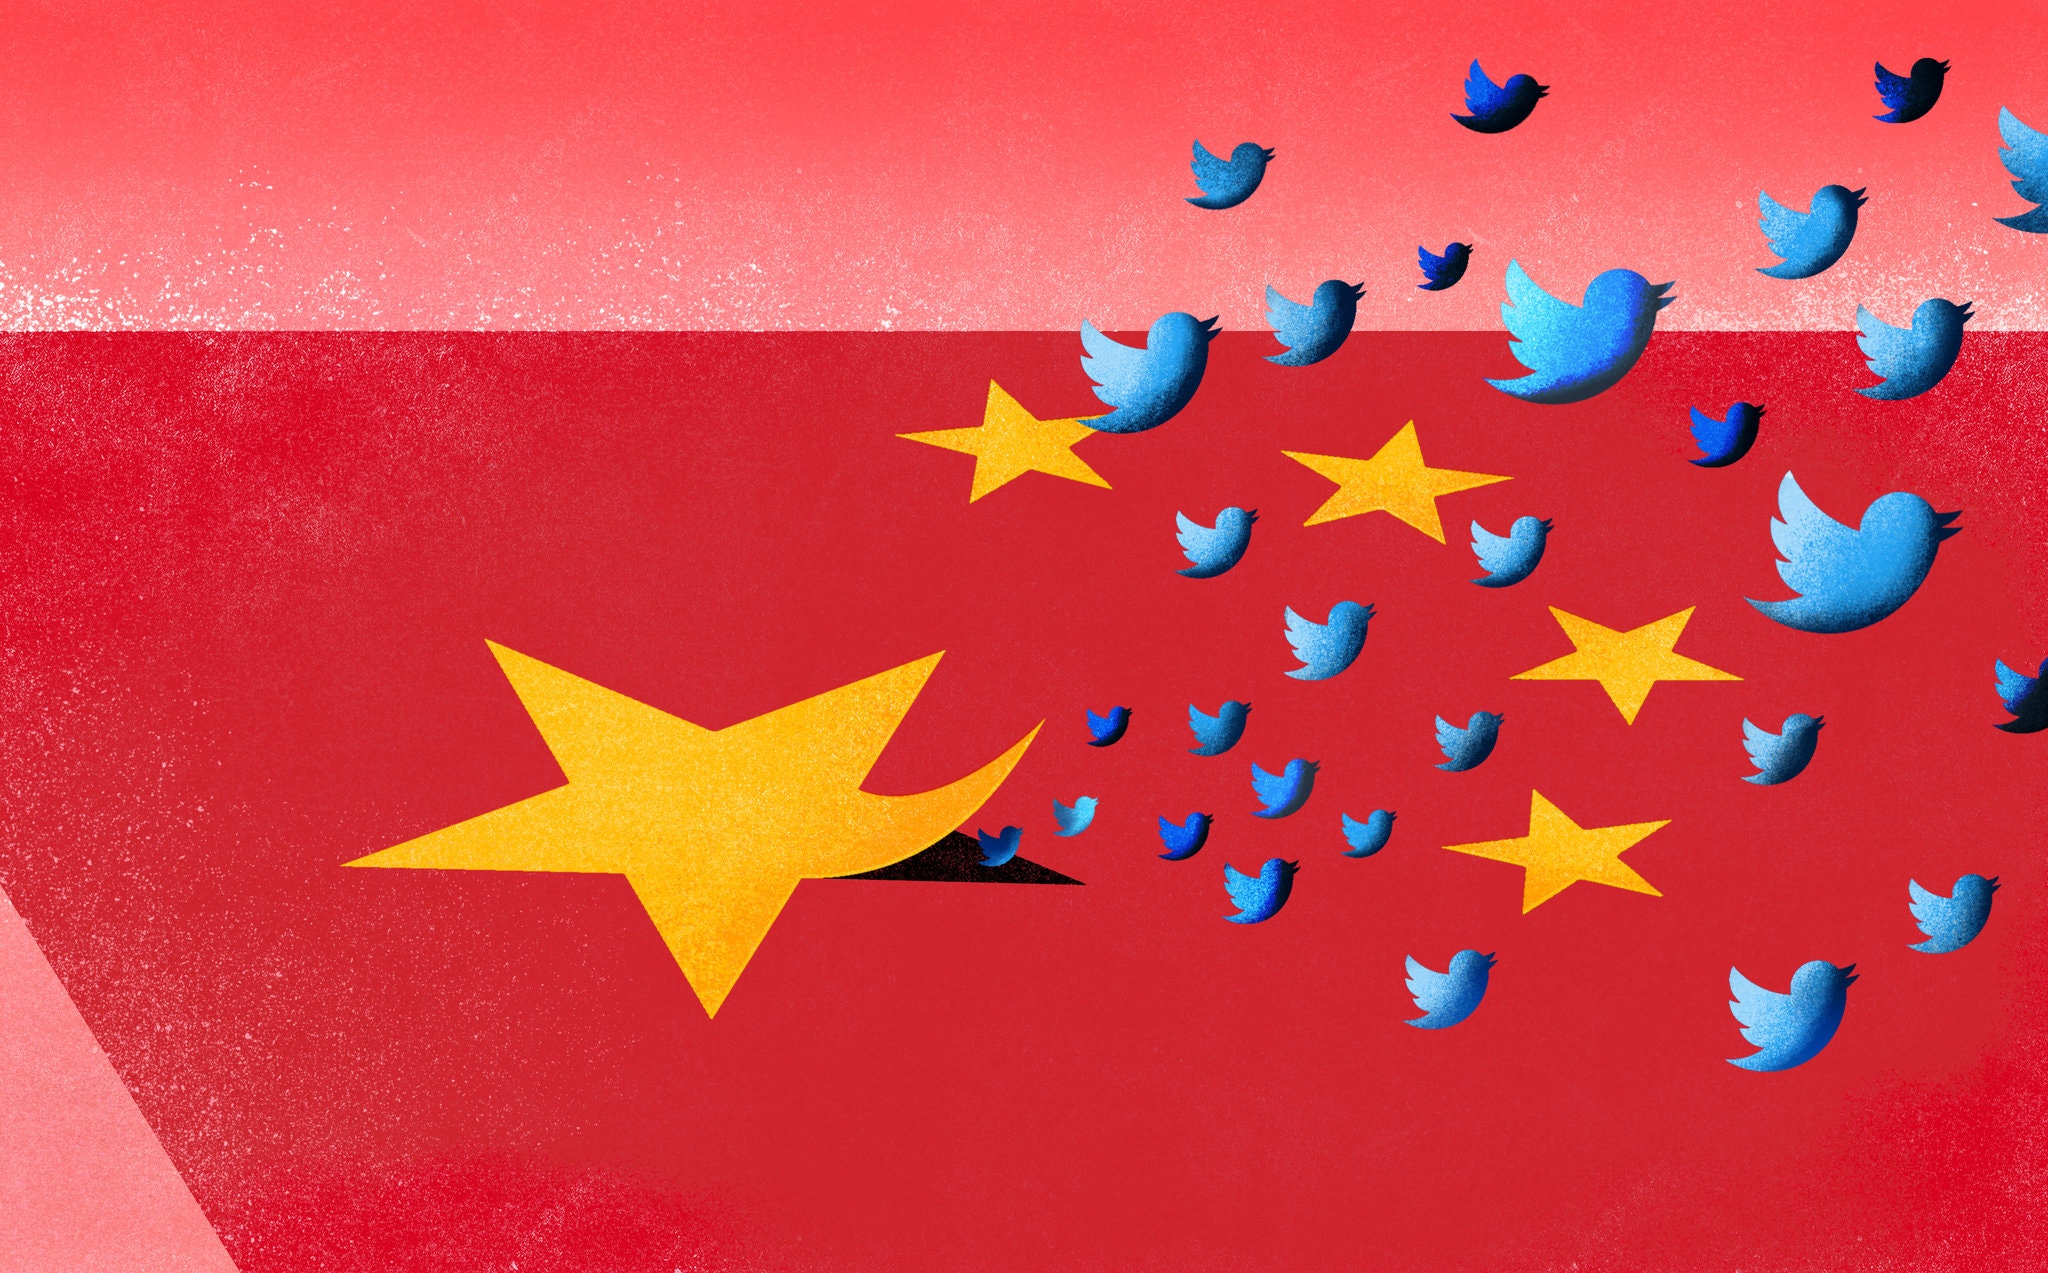 Behind China’s Twitter Campaign, a Murky Supporting Chorus